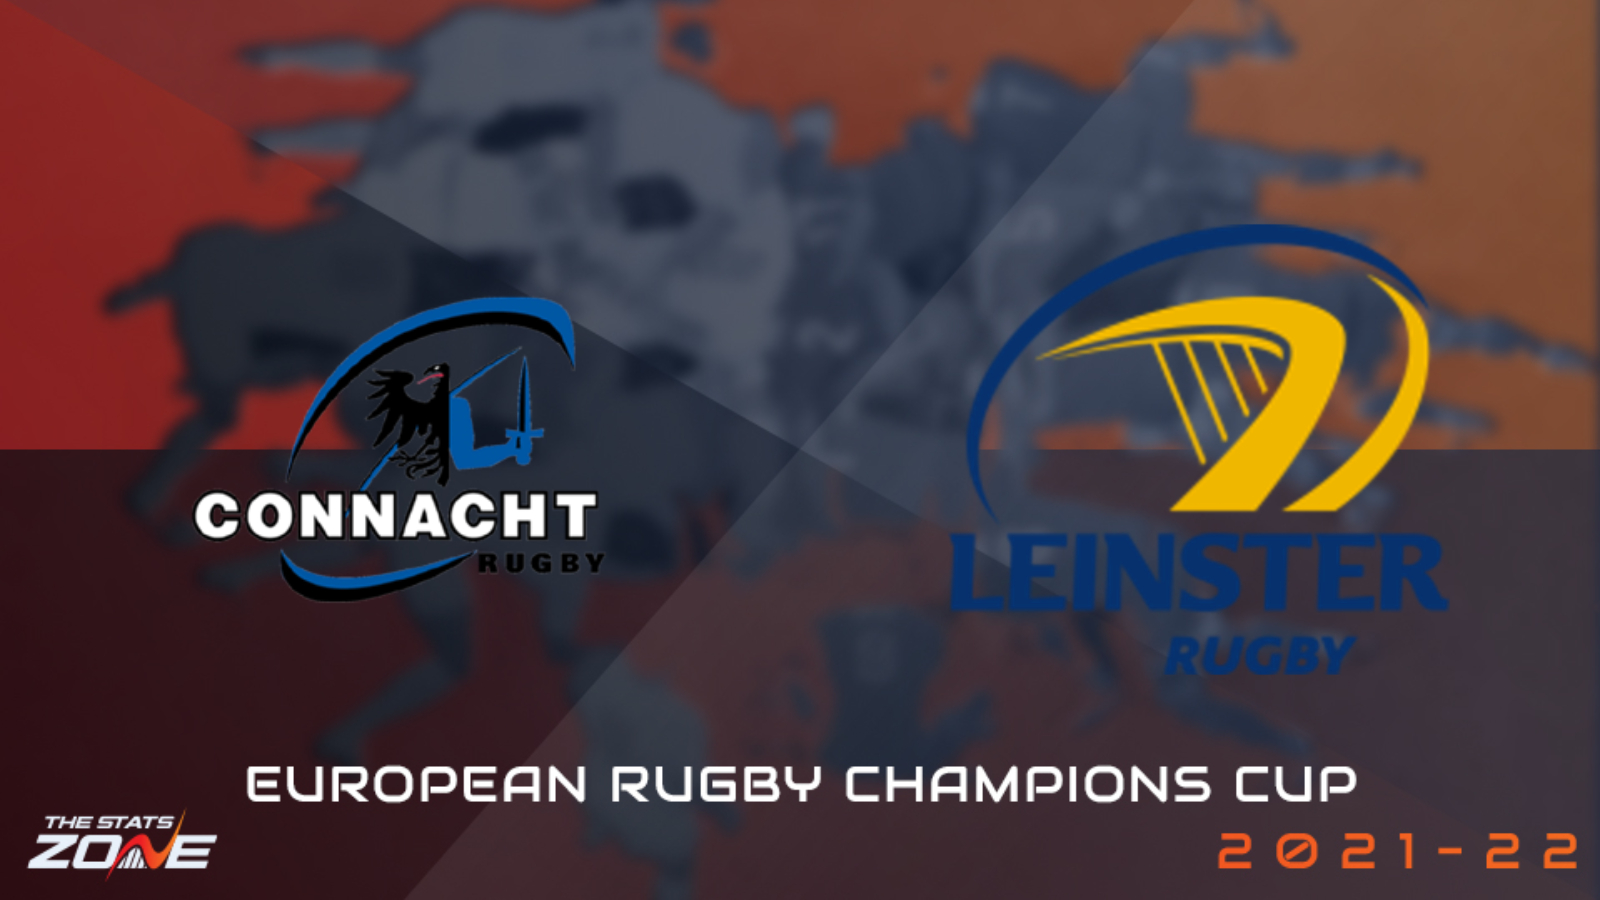 Connacht vs Leinster Preview and Prediction